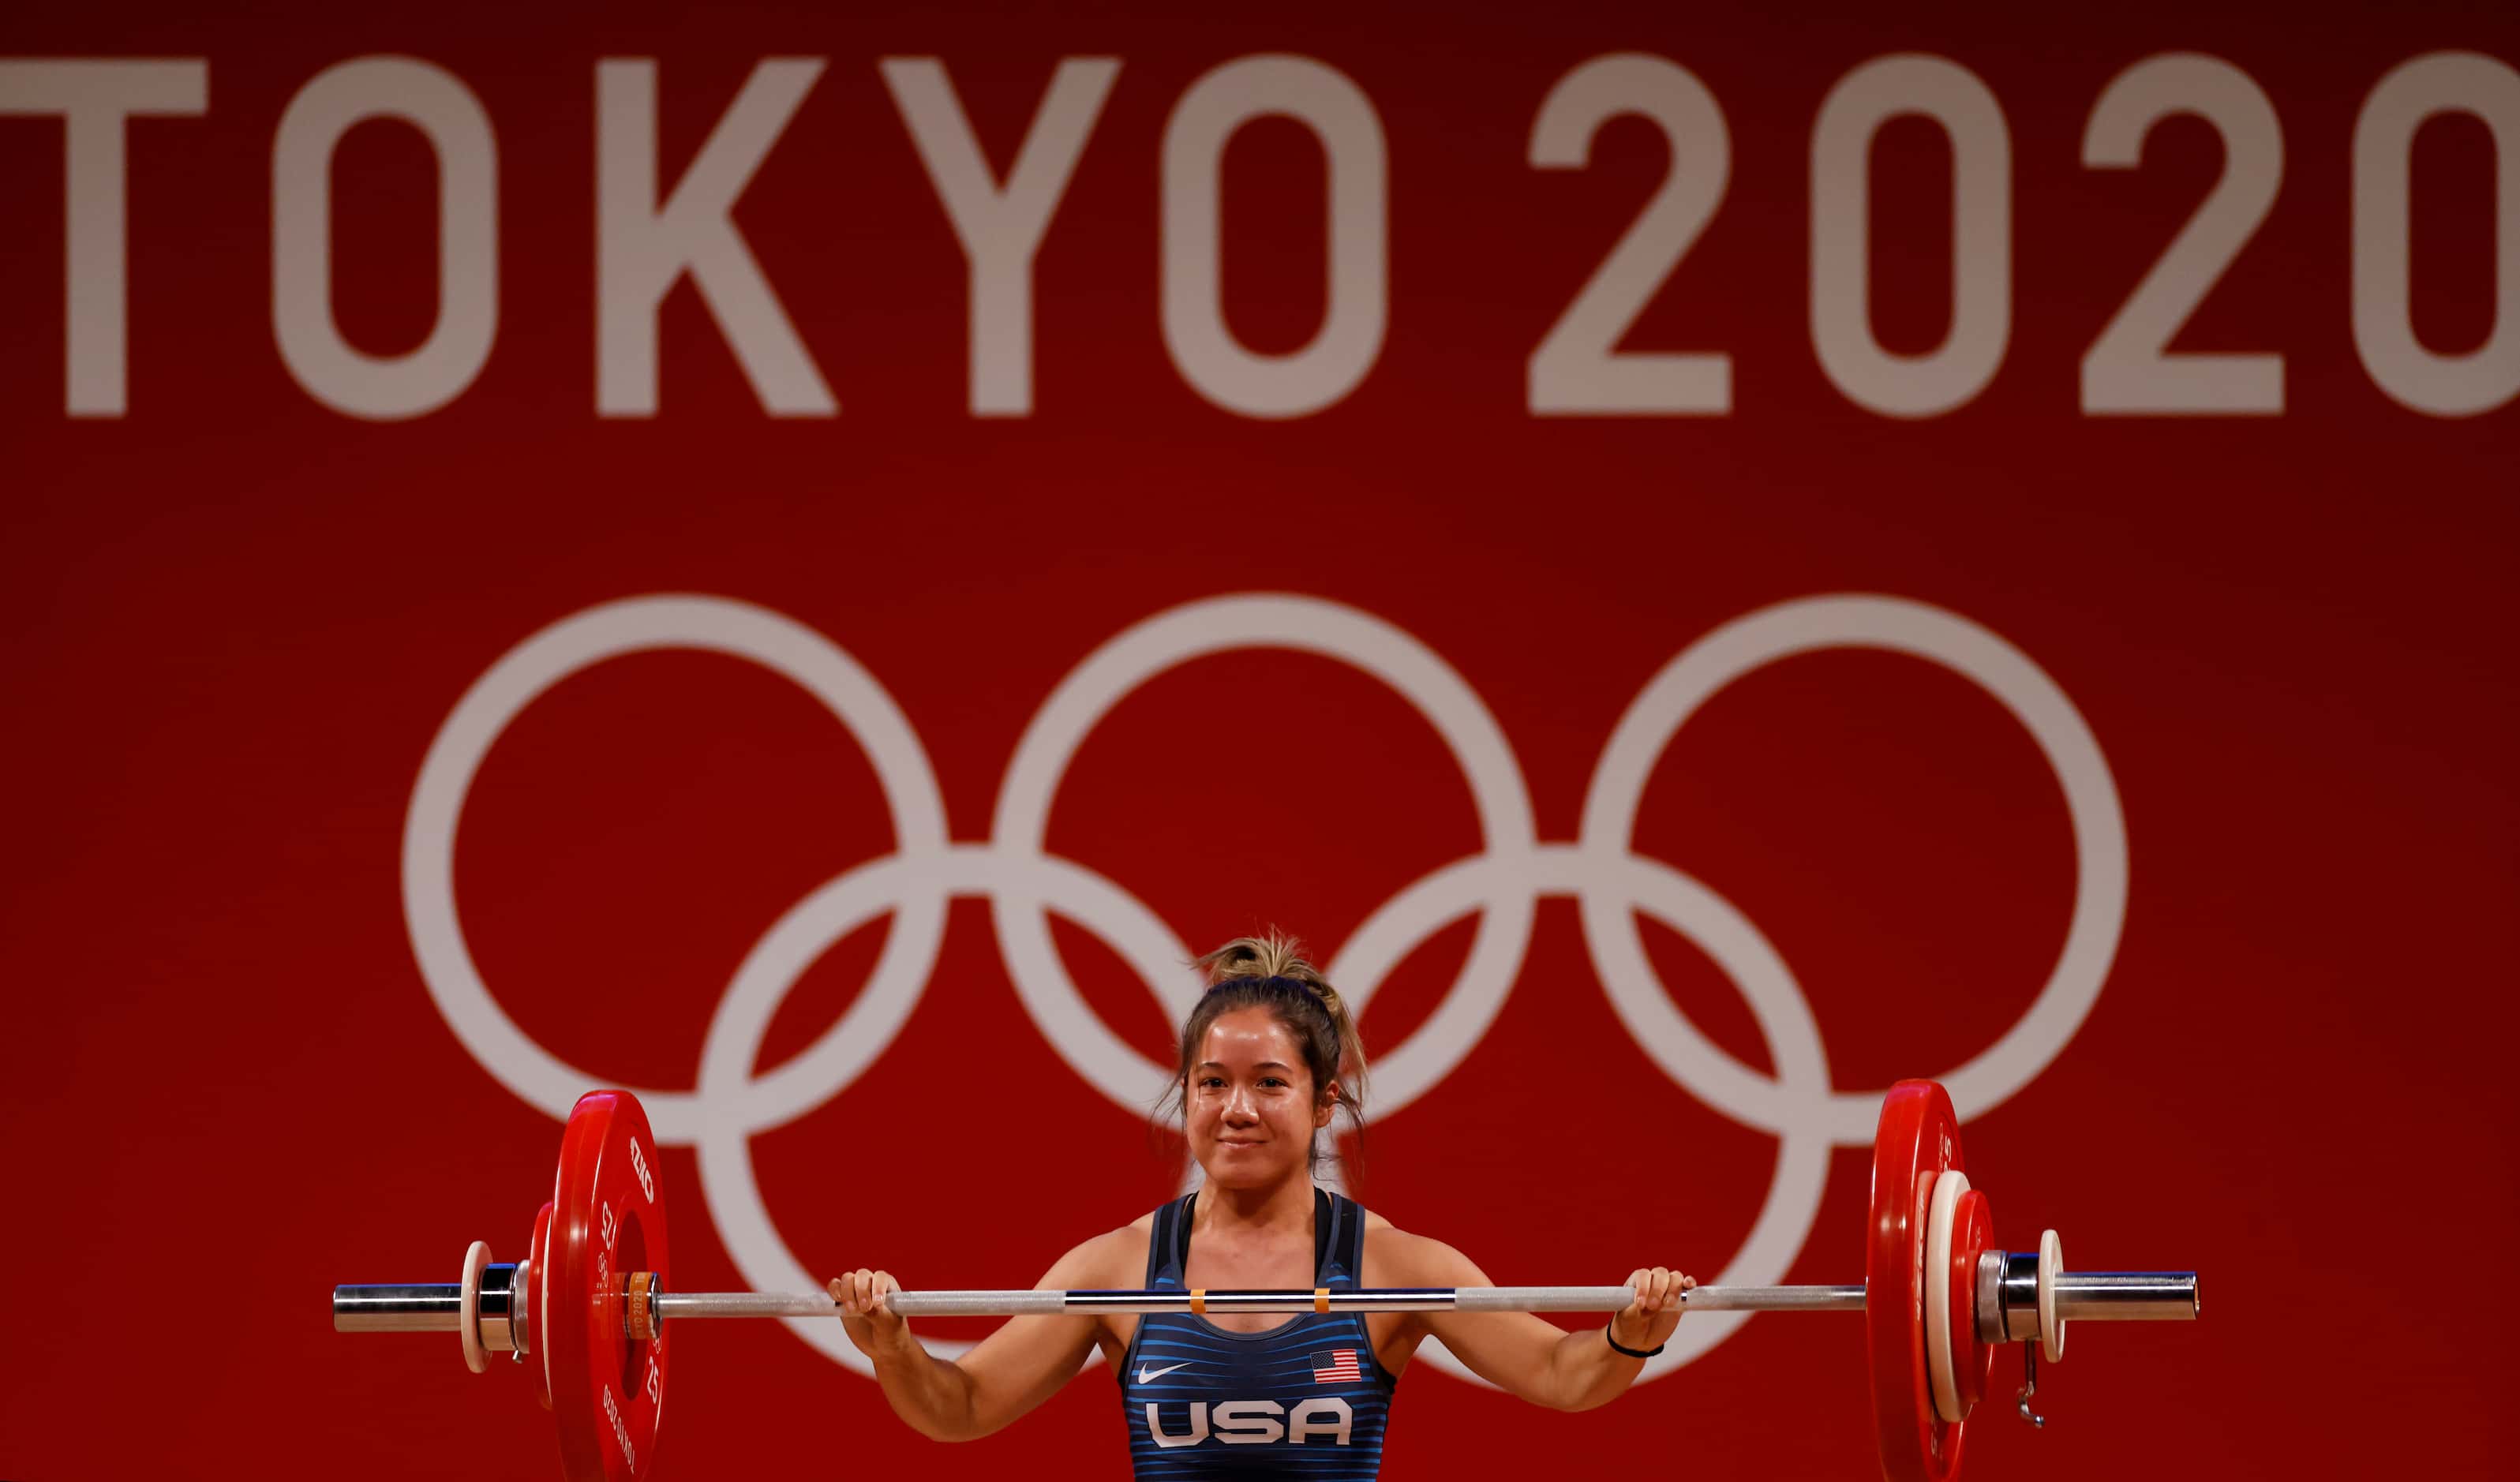 USA’s Jourdan Delacruz smiles after lifting 83 kg in the first attempt of the snatch round...